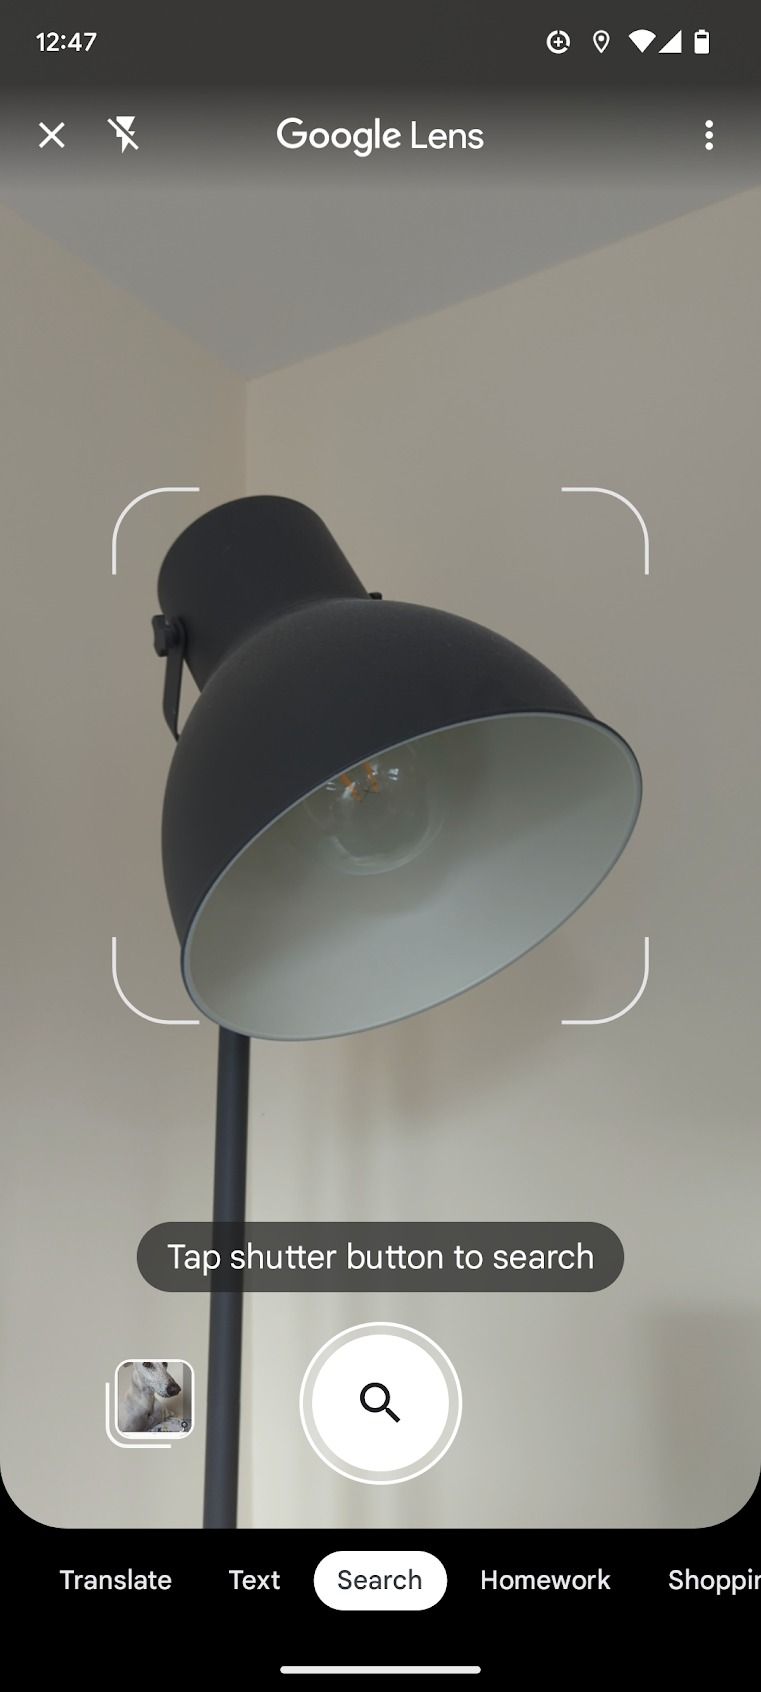 A screenshot of the Google Lens app is displayed, with the camera viewfinder focused on scanning a lamp.